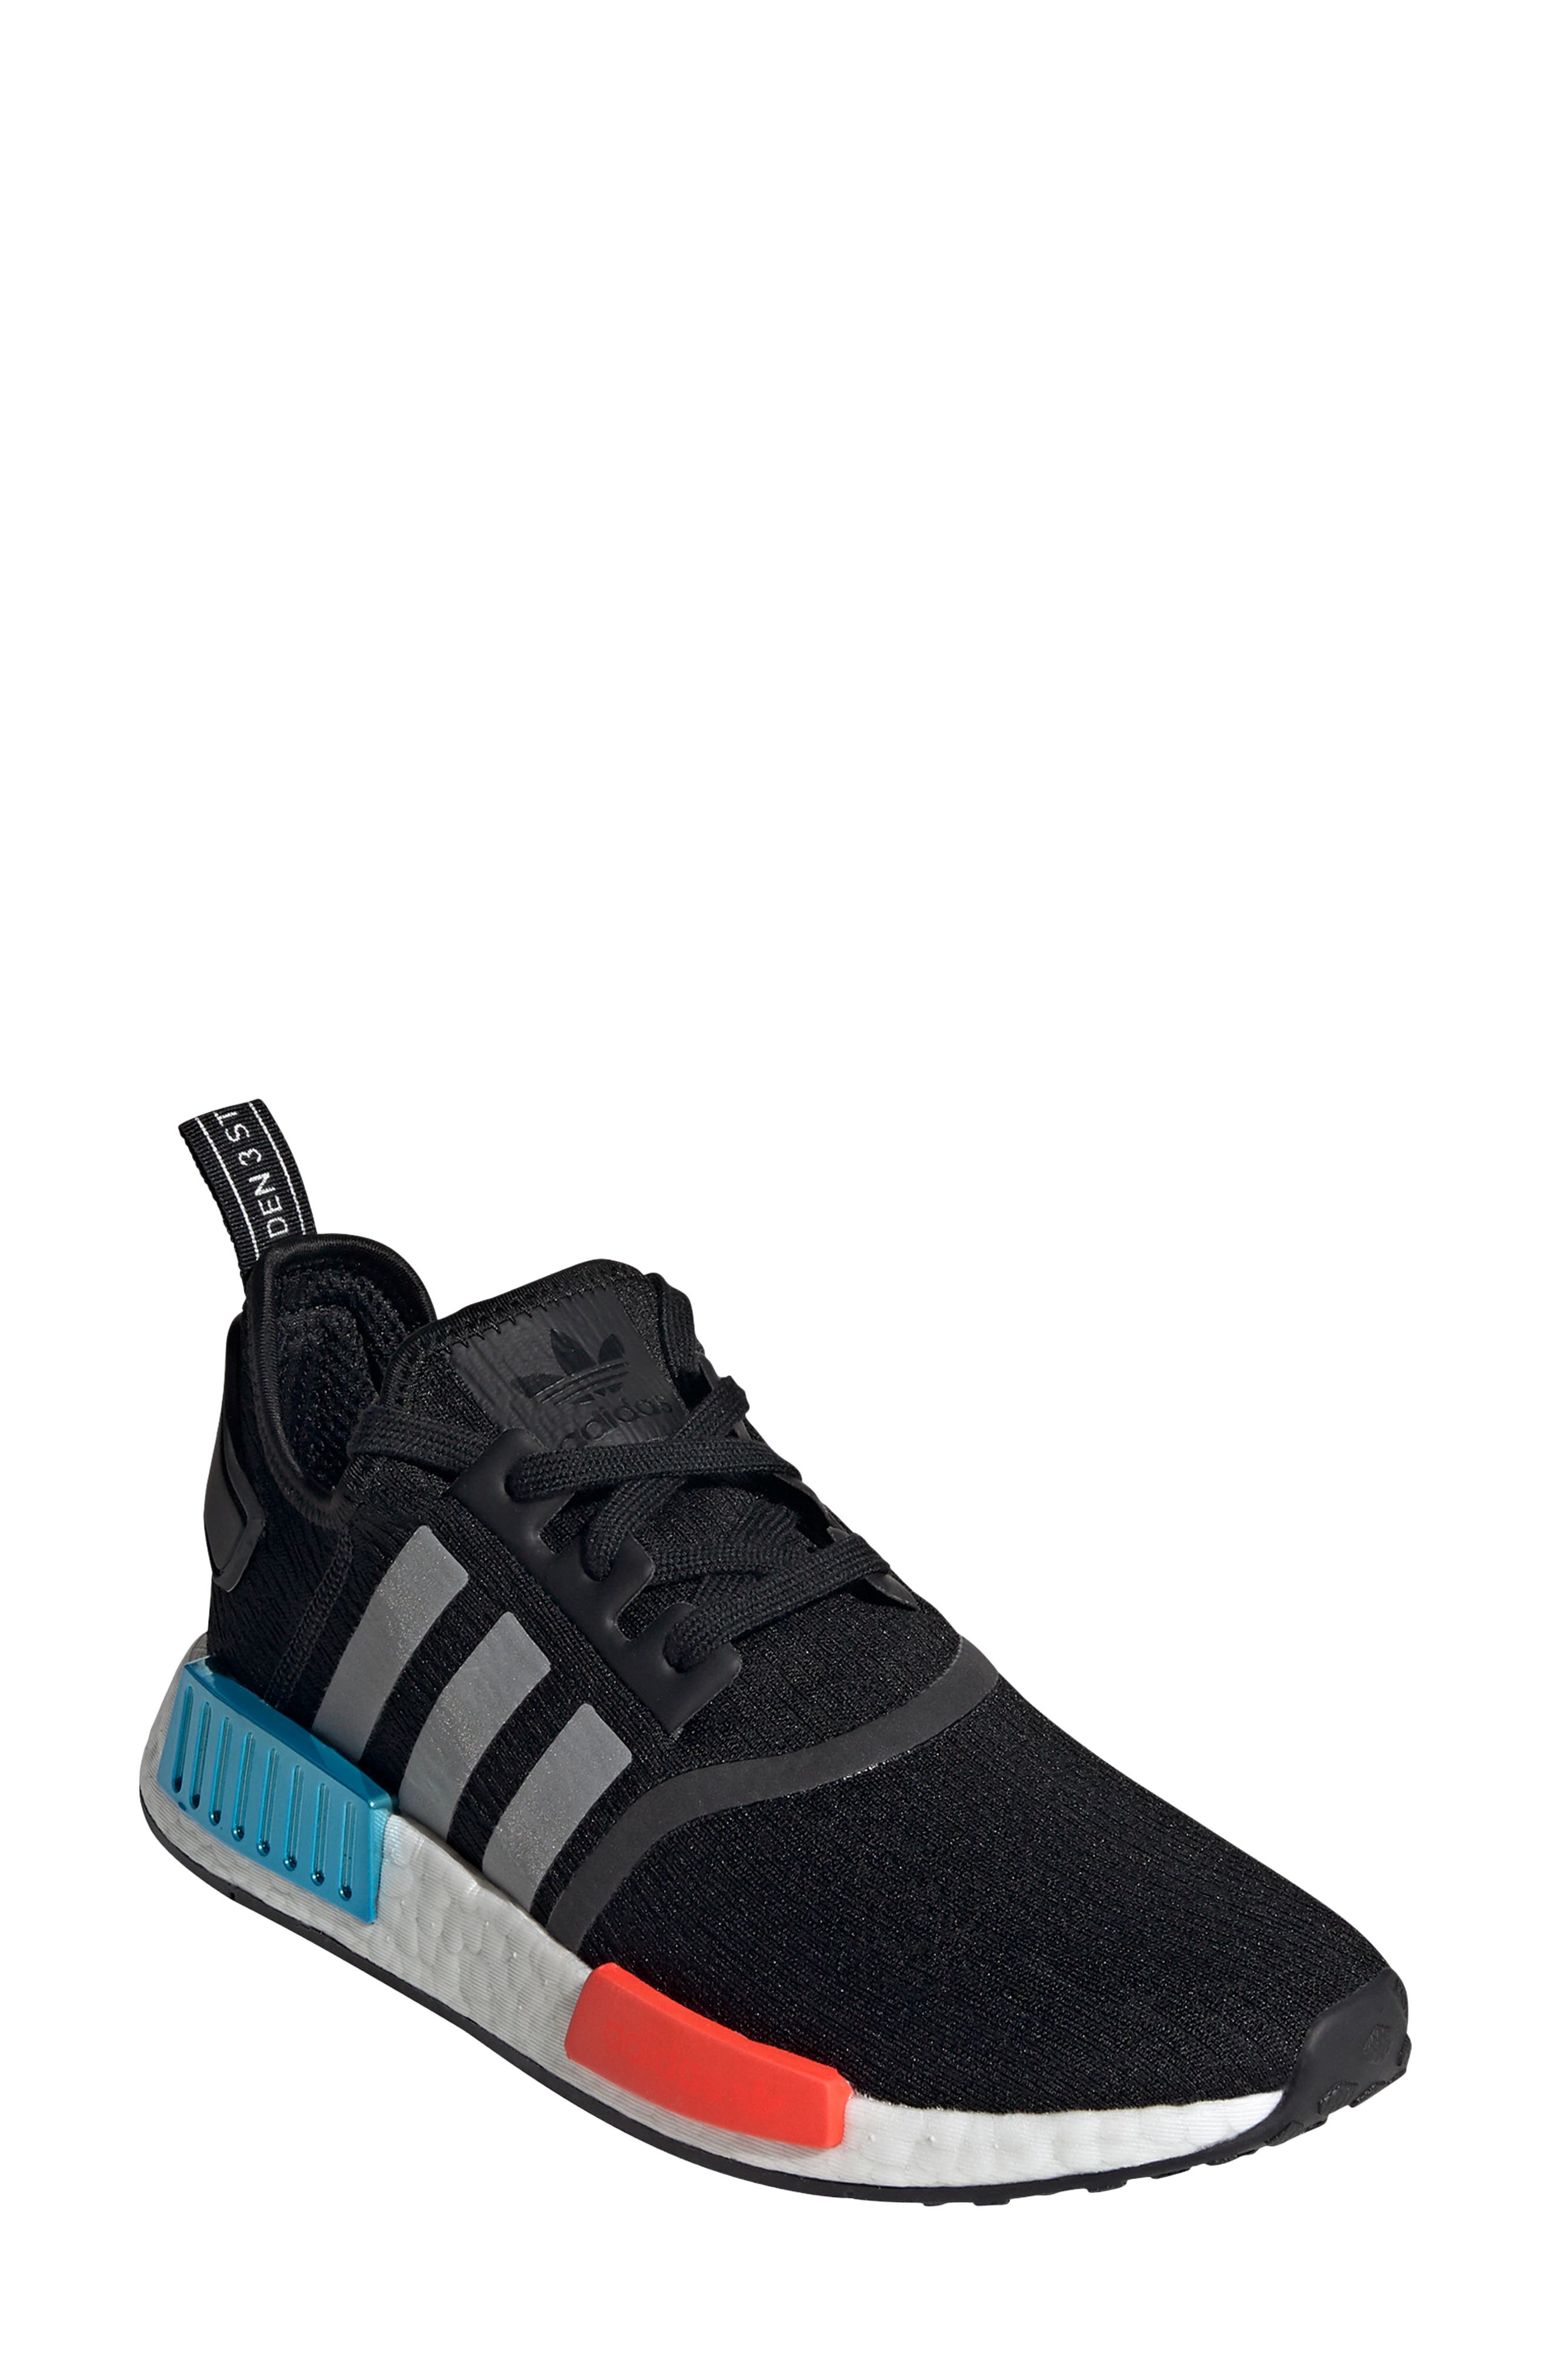 adidas nmd xr1 colors